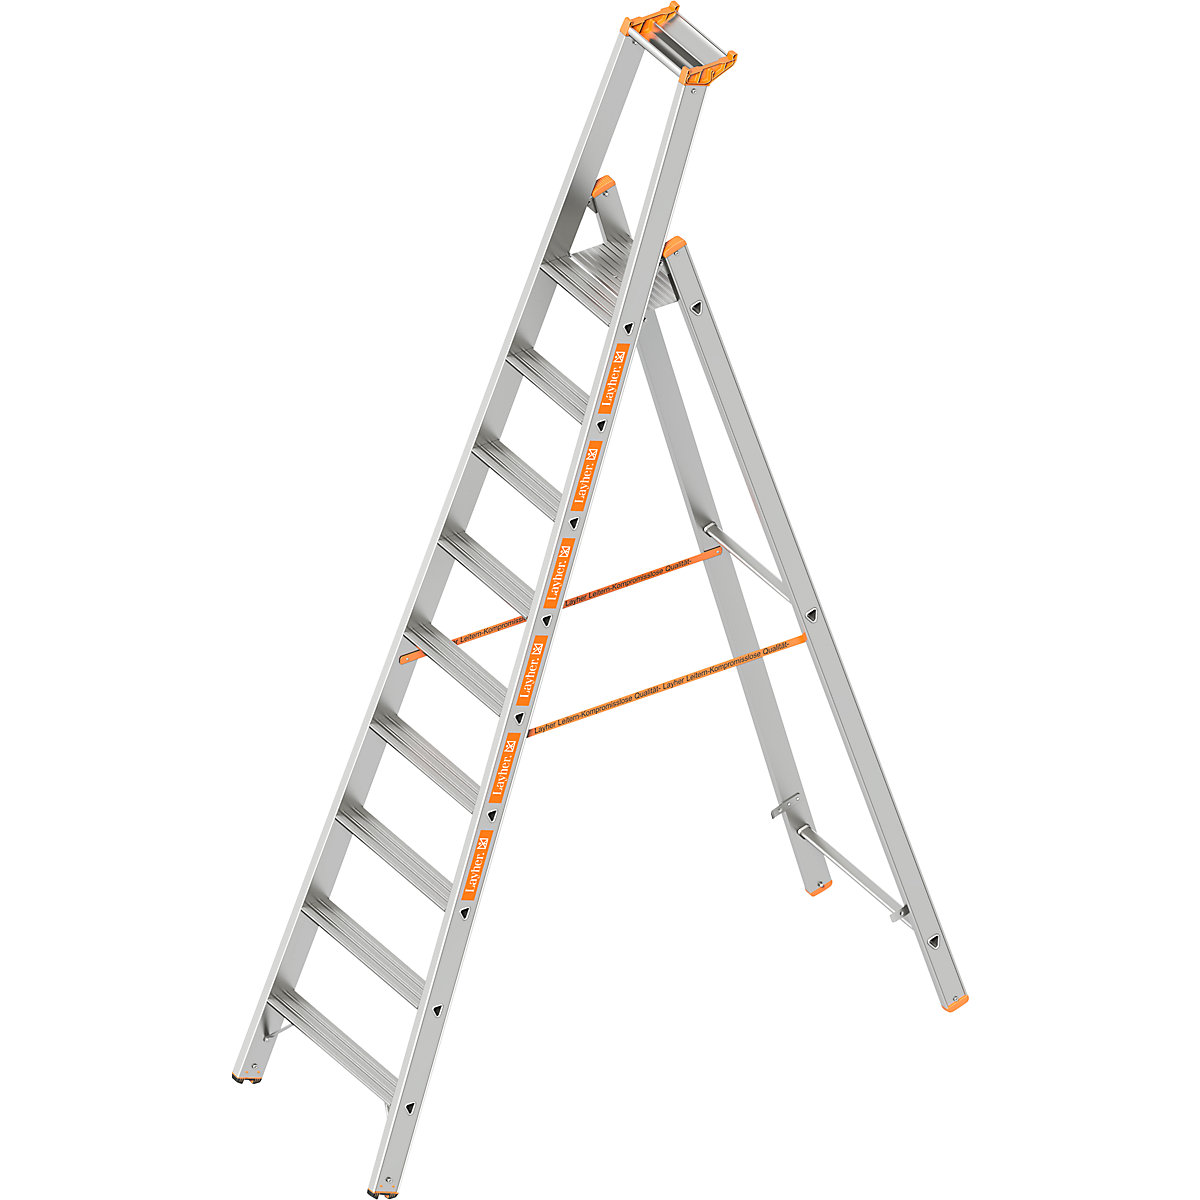 Step ladder – Layher, single sided access, 9 steps incl. platform-7